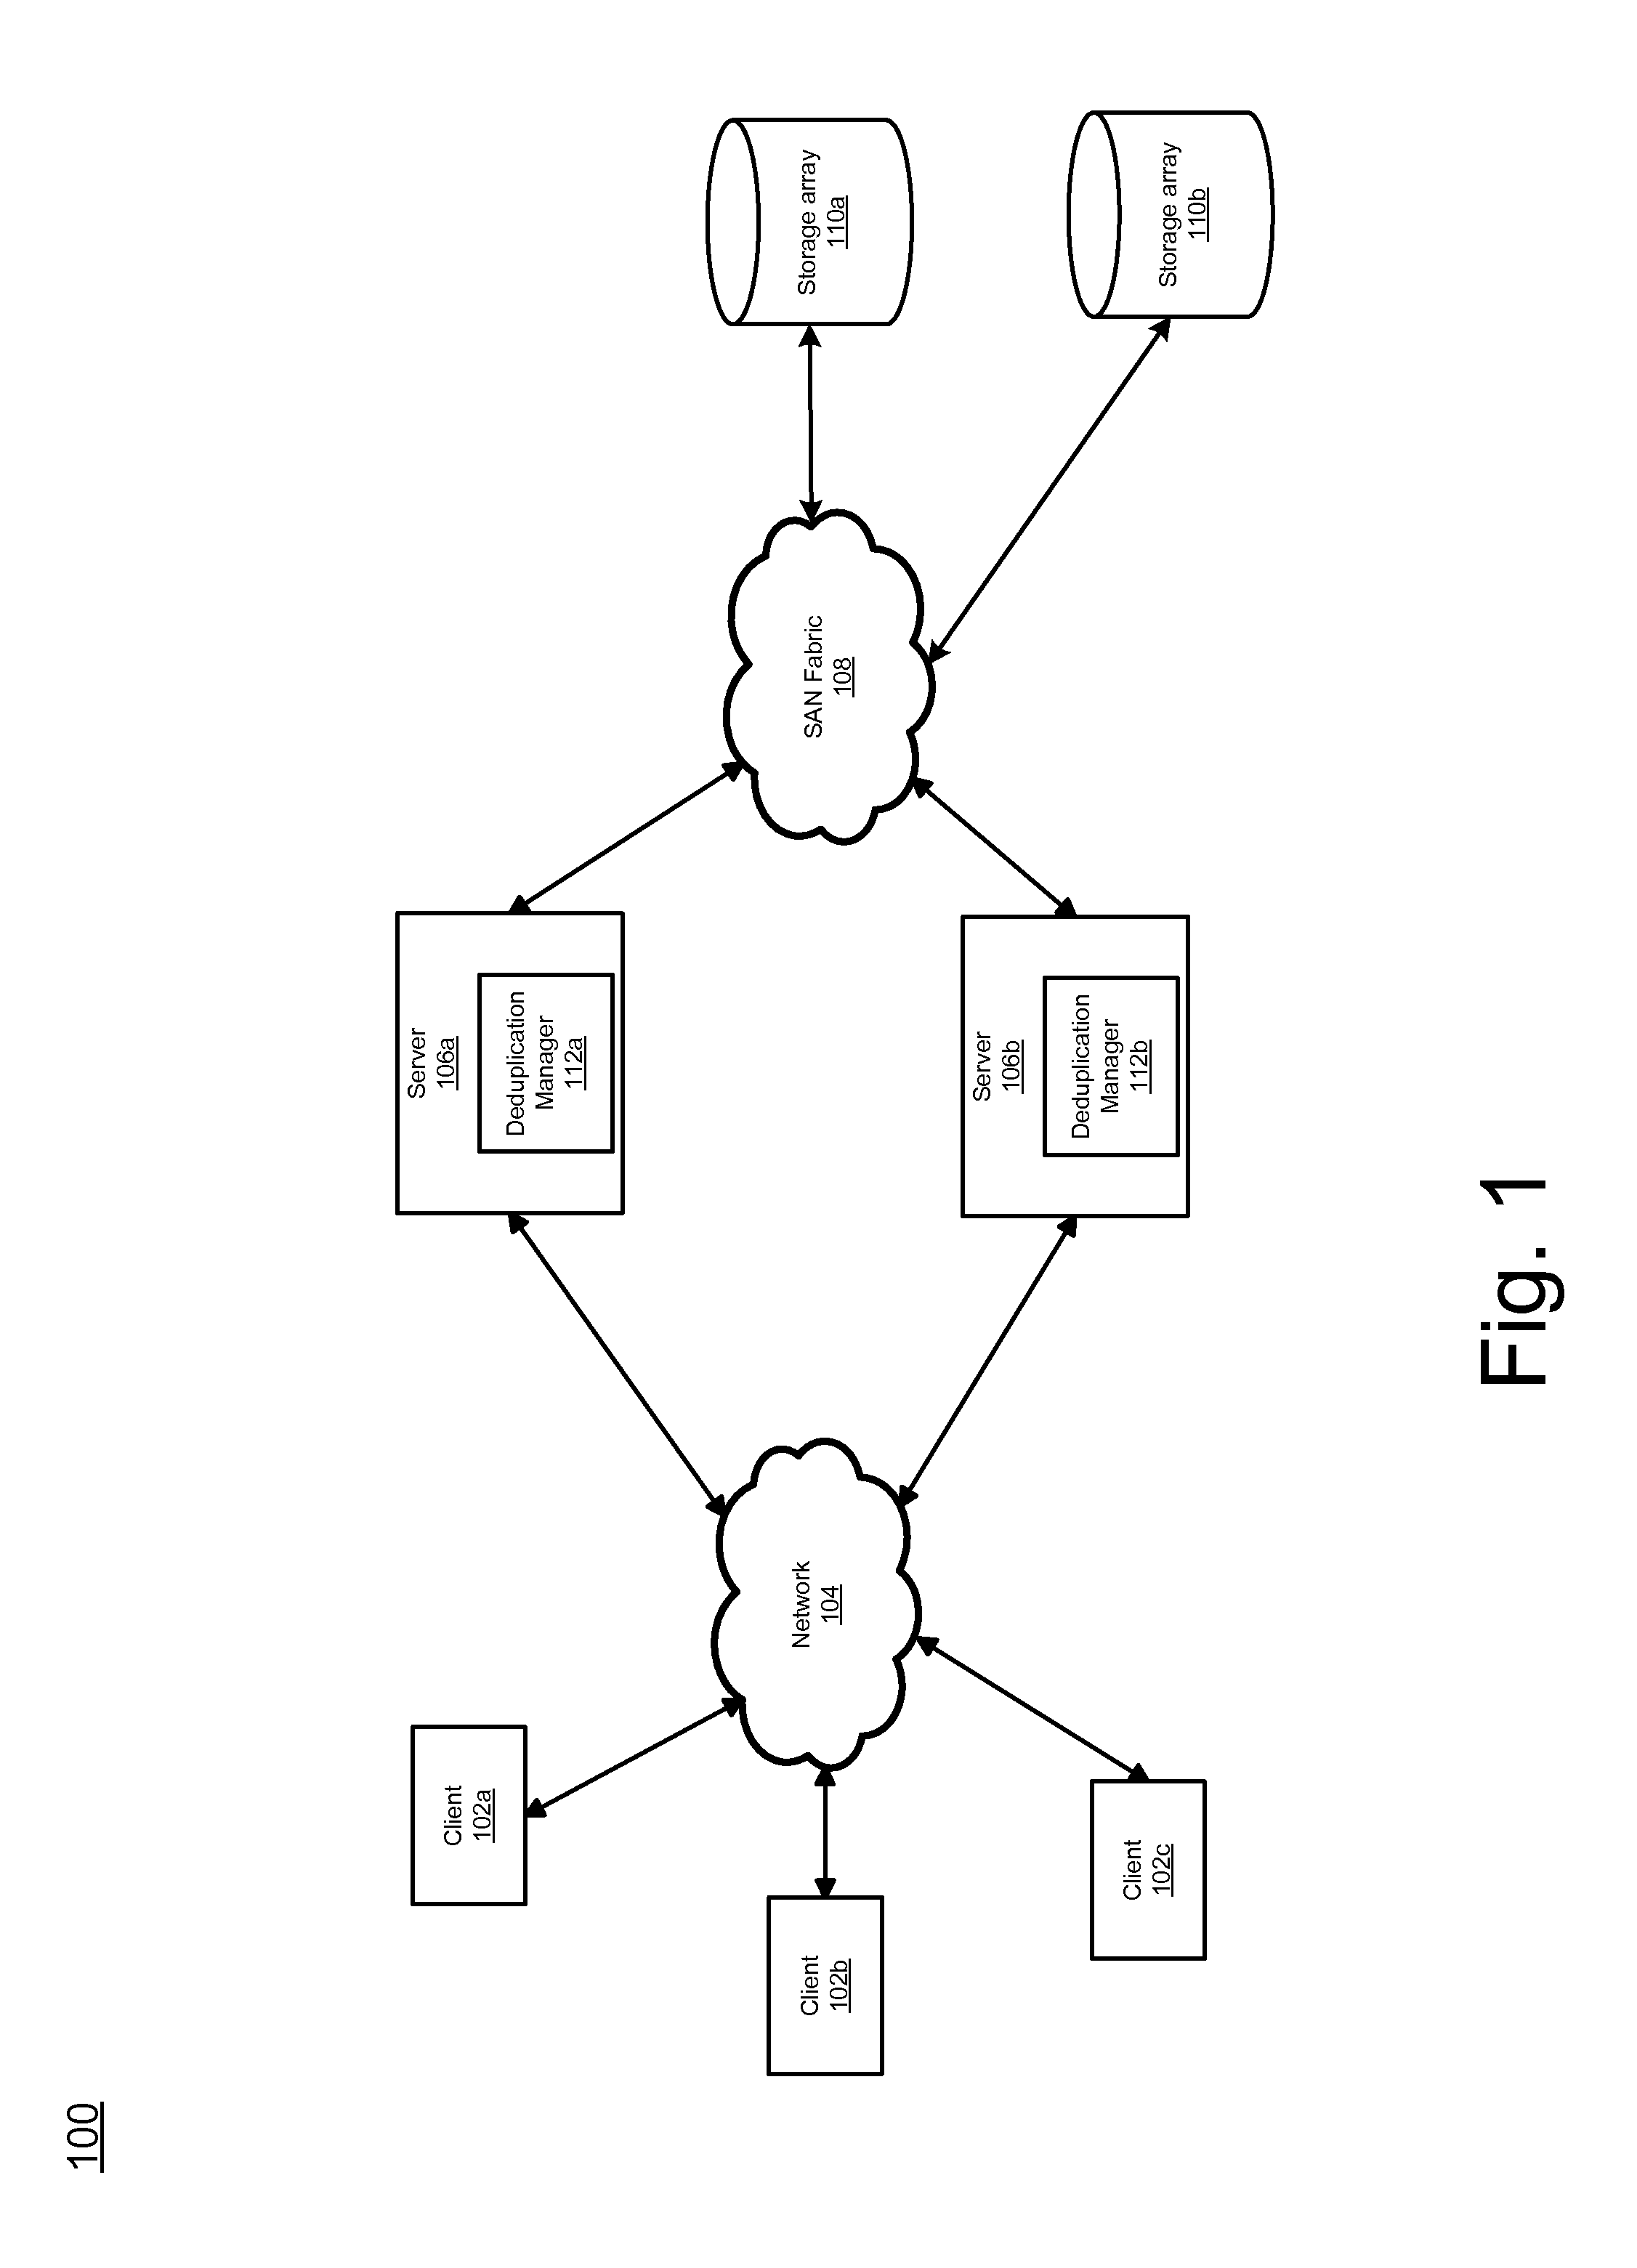 System and method for filesystem deduplication using variable length sharing